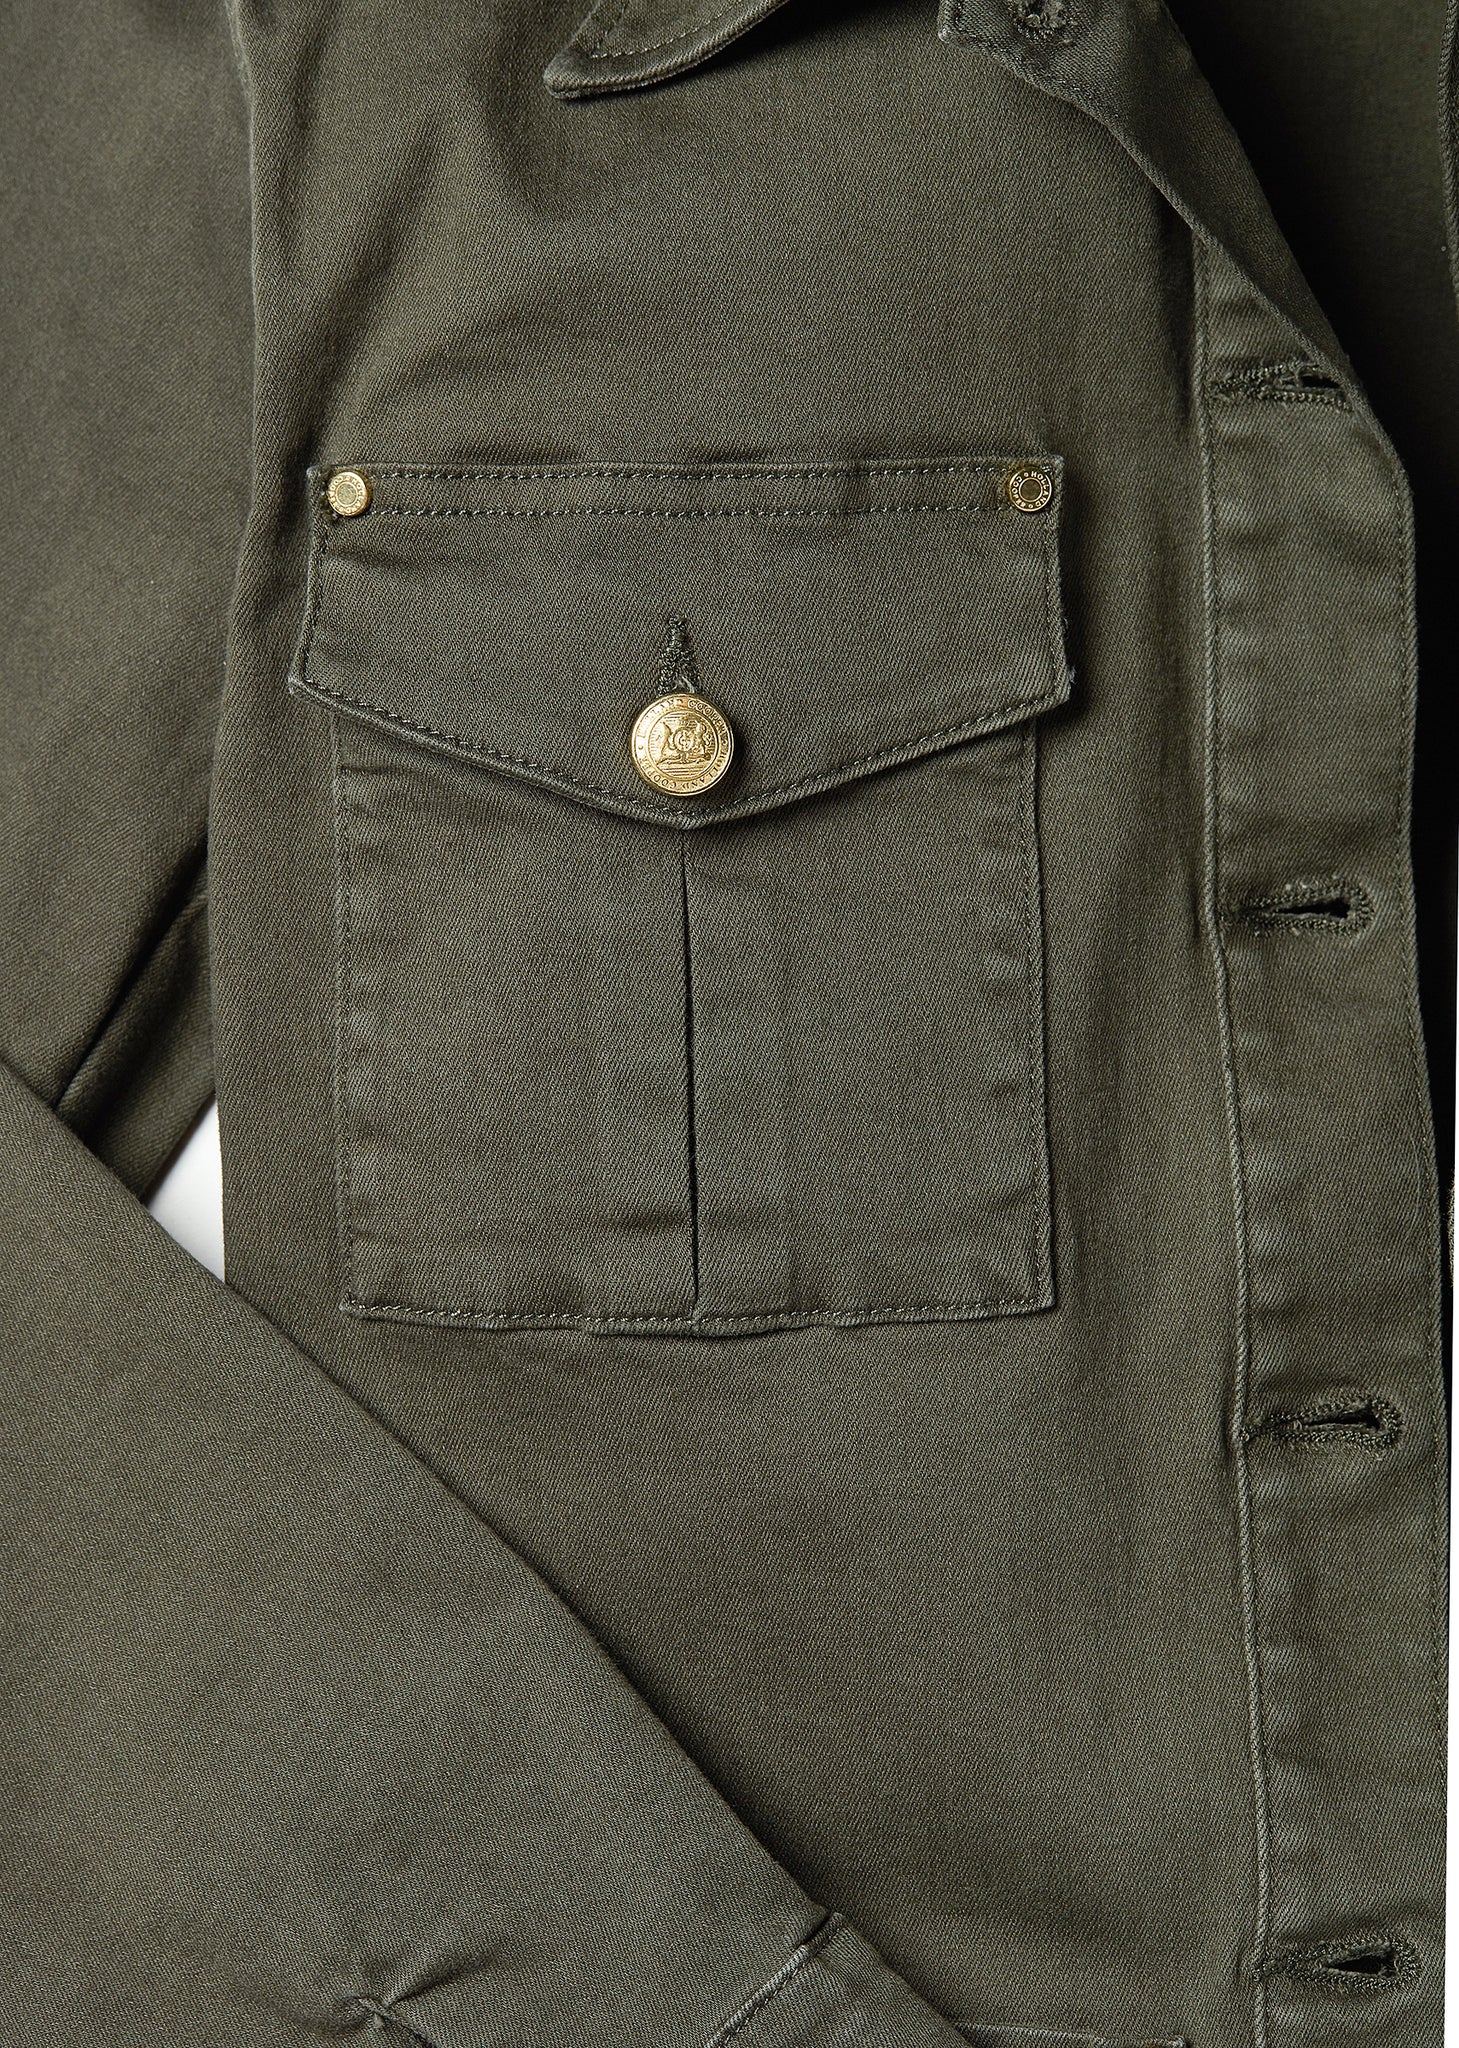 pleated pocket detail on Relaxed fit collared artillery style jacket in khaki with four pockets two chest ones being box pleated  and two hip being patch pockets with gold jean button fastenings adjustable long sleeves and epaulette shoulder detail